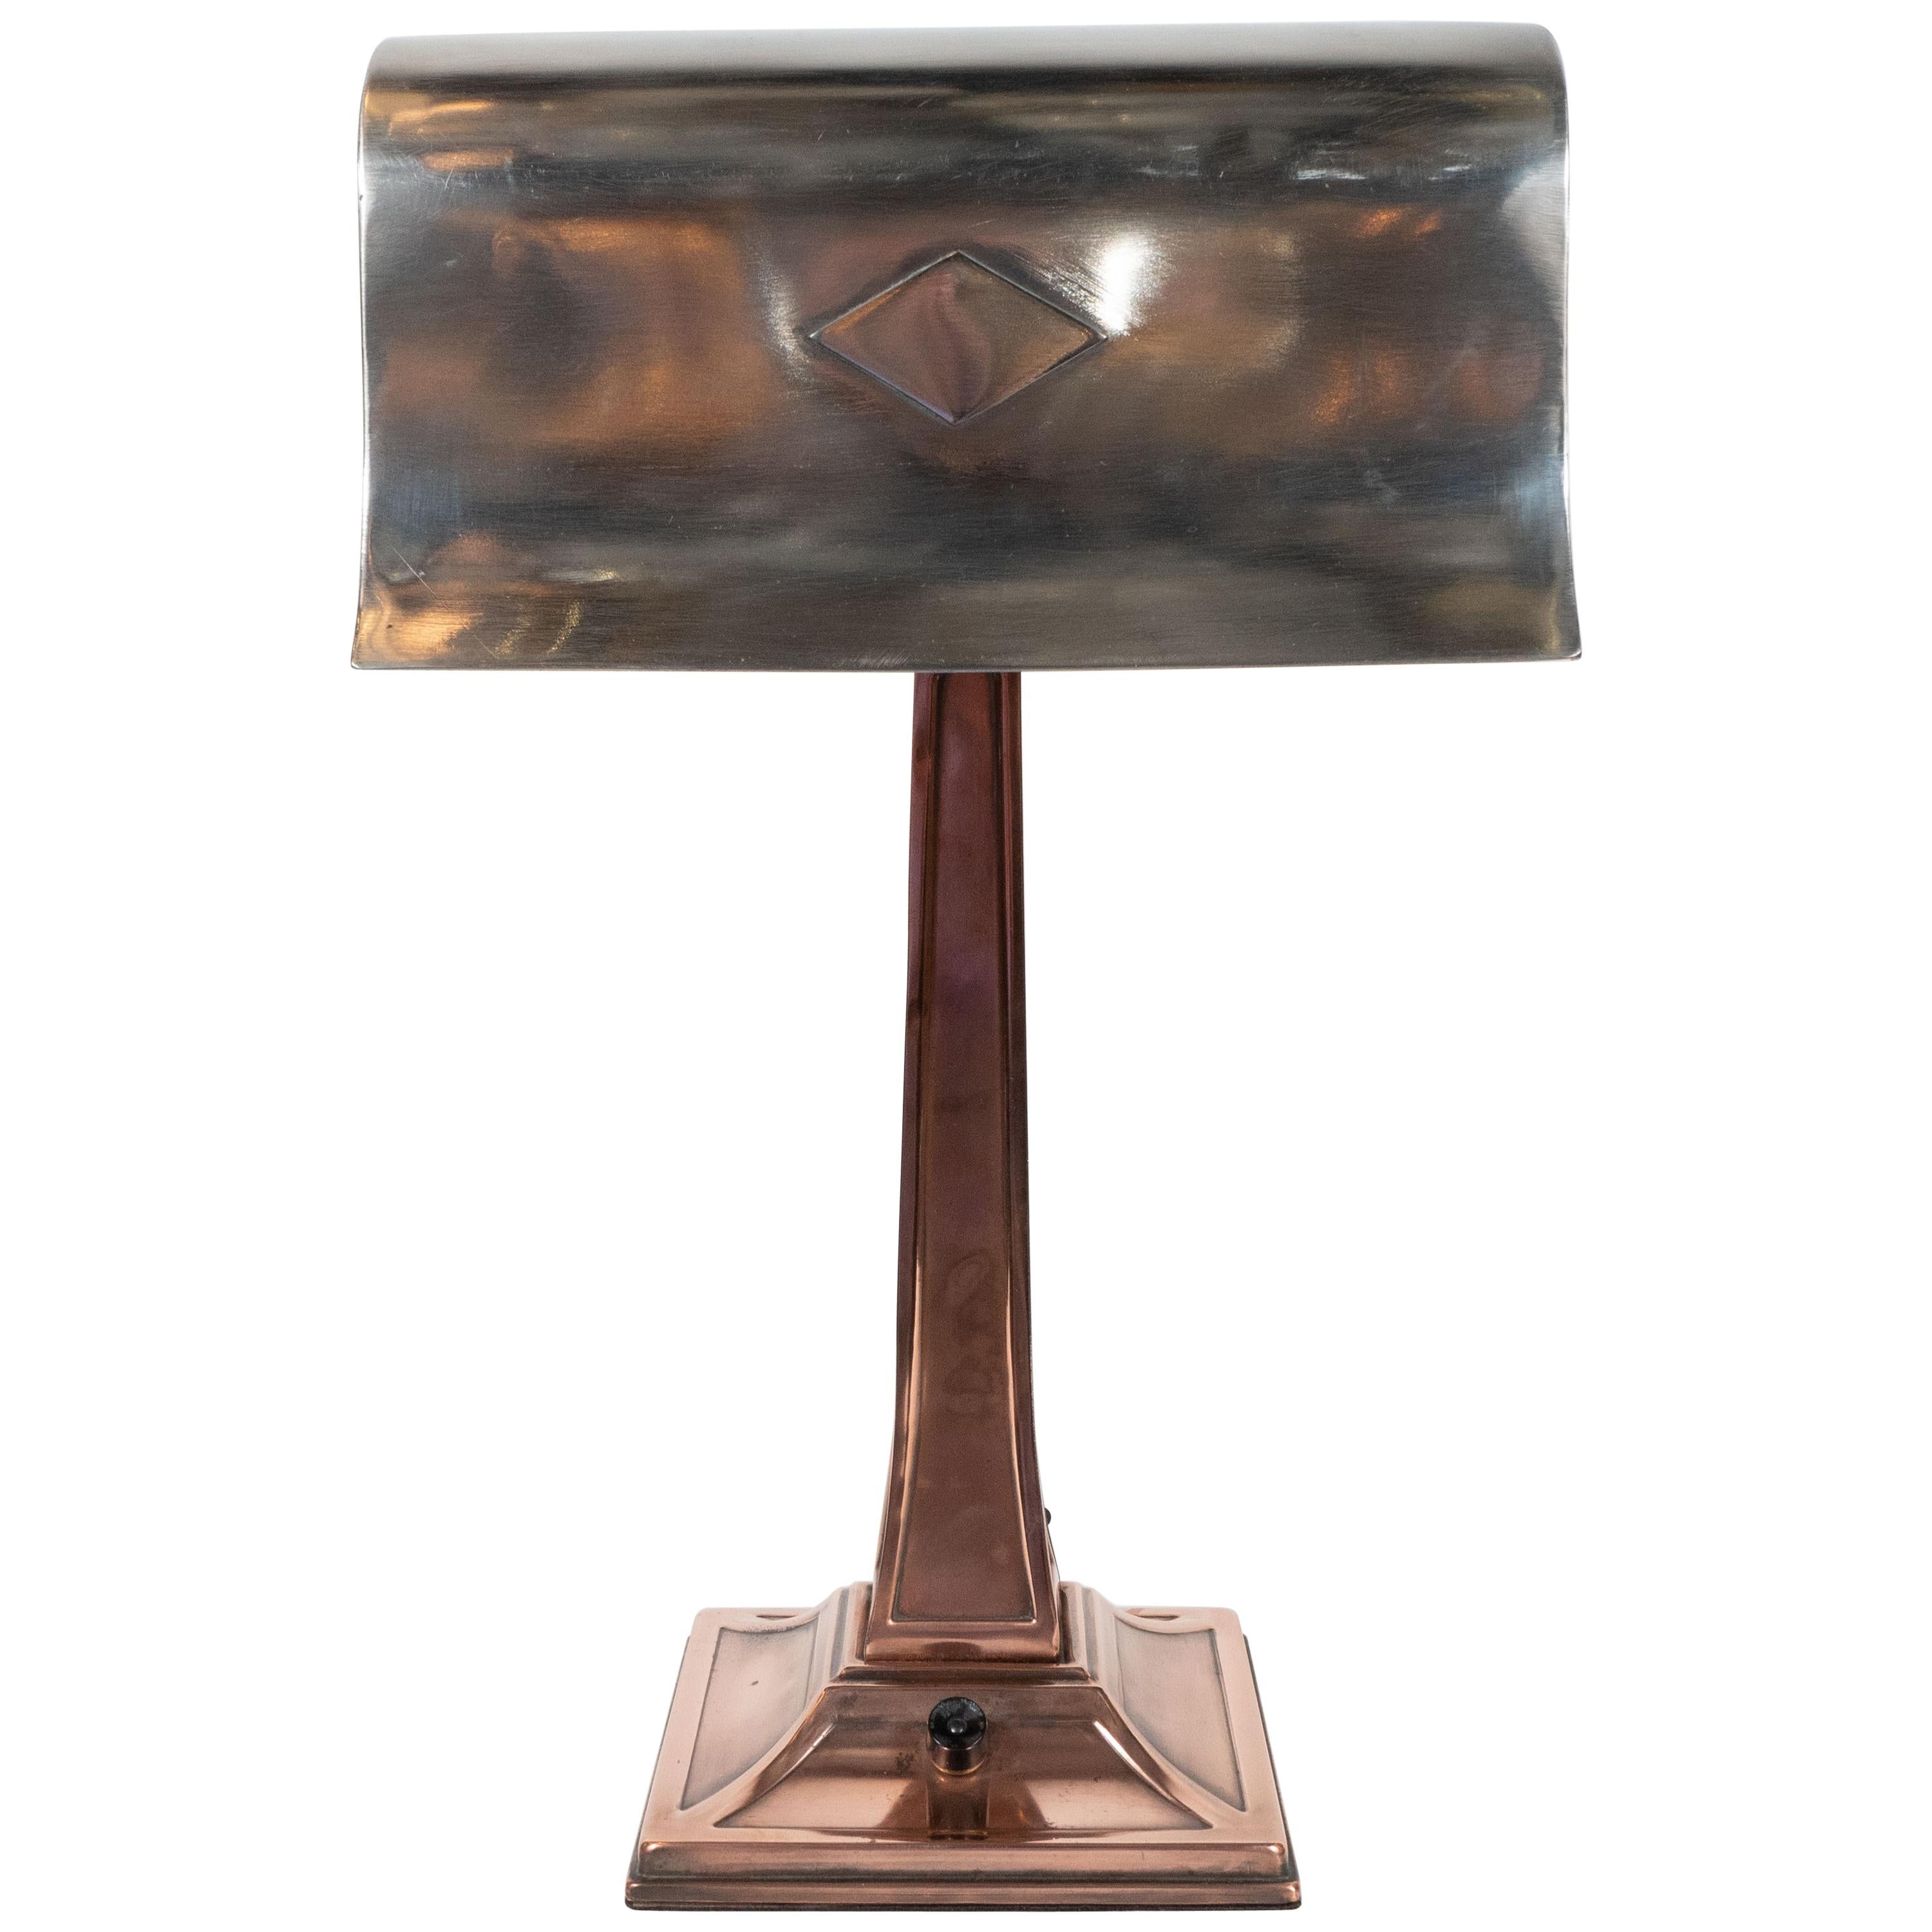 Early Art Deco Copper & Polished Aluminum Table Lamp with Cubist Embellishment